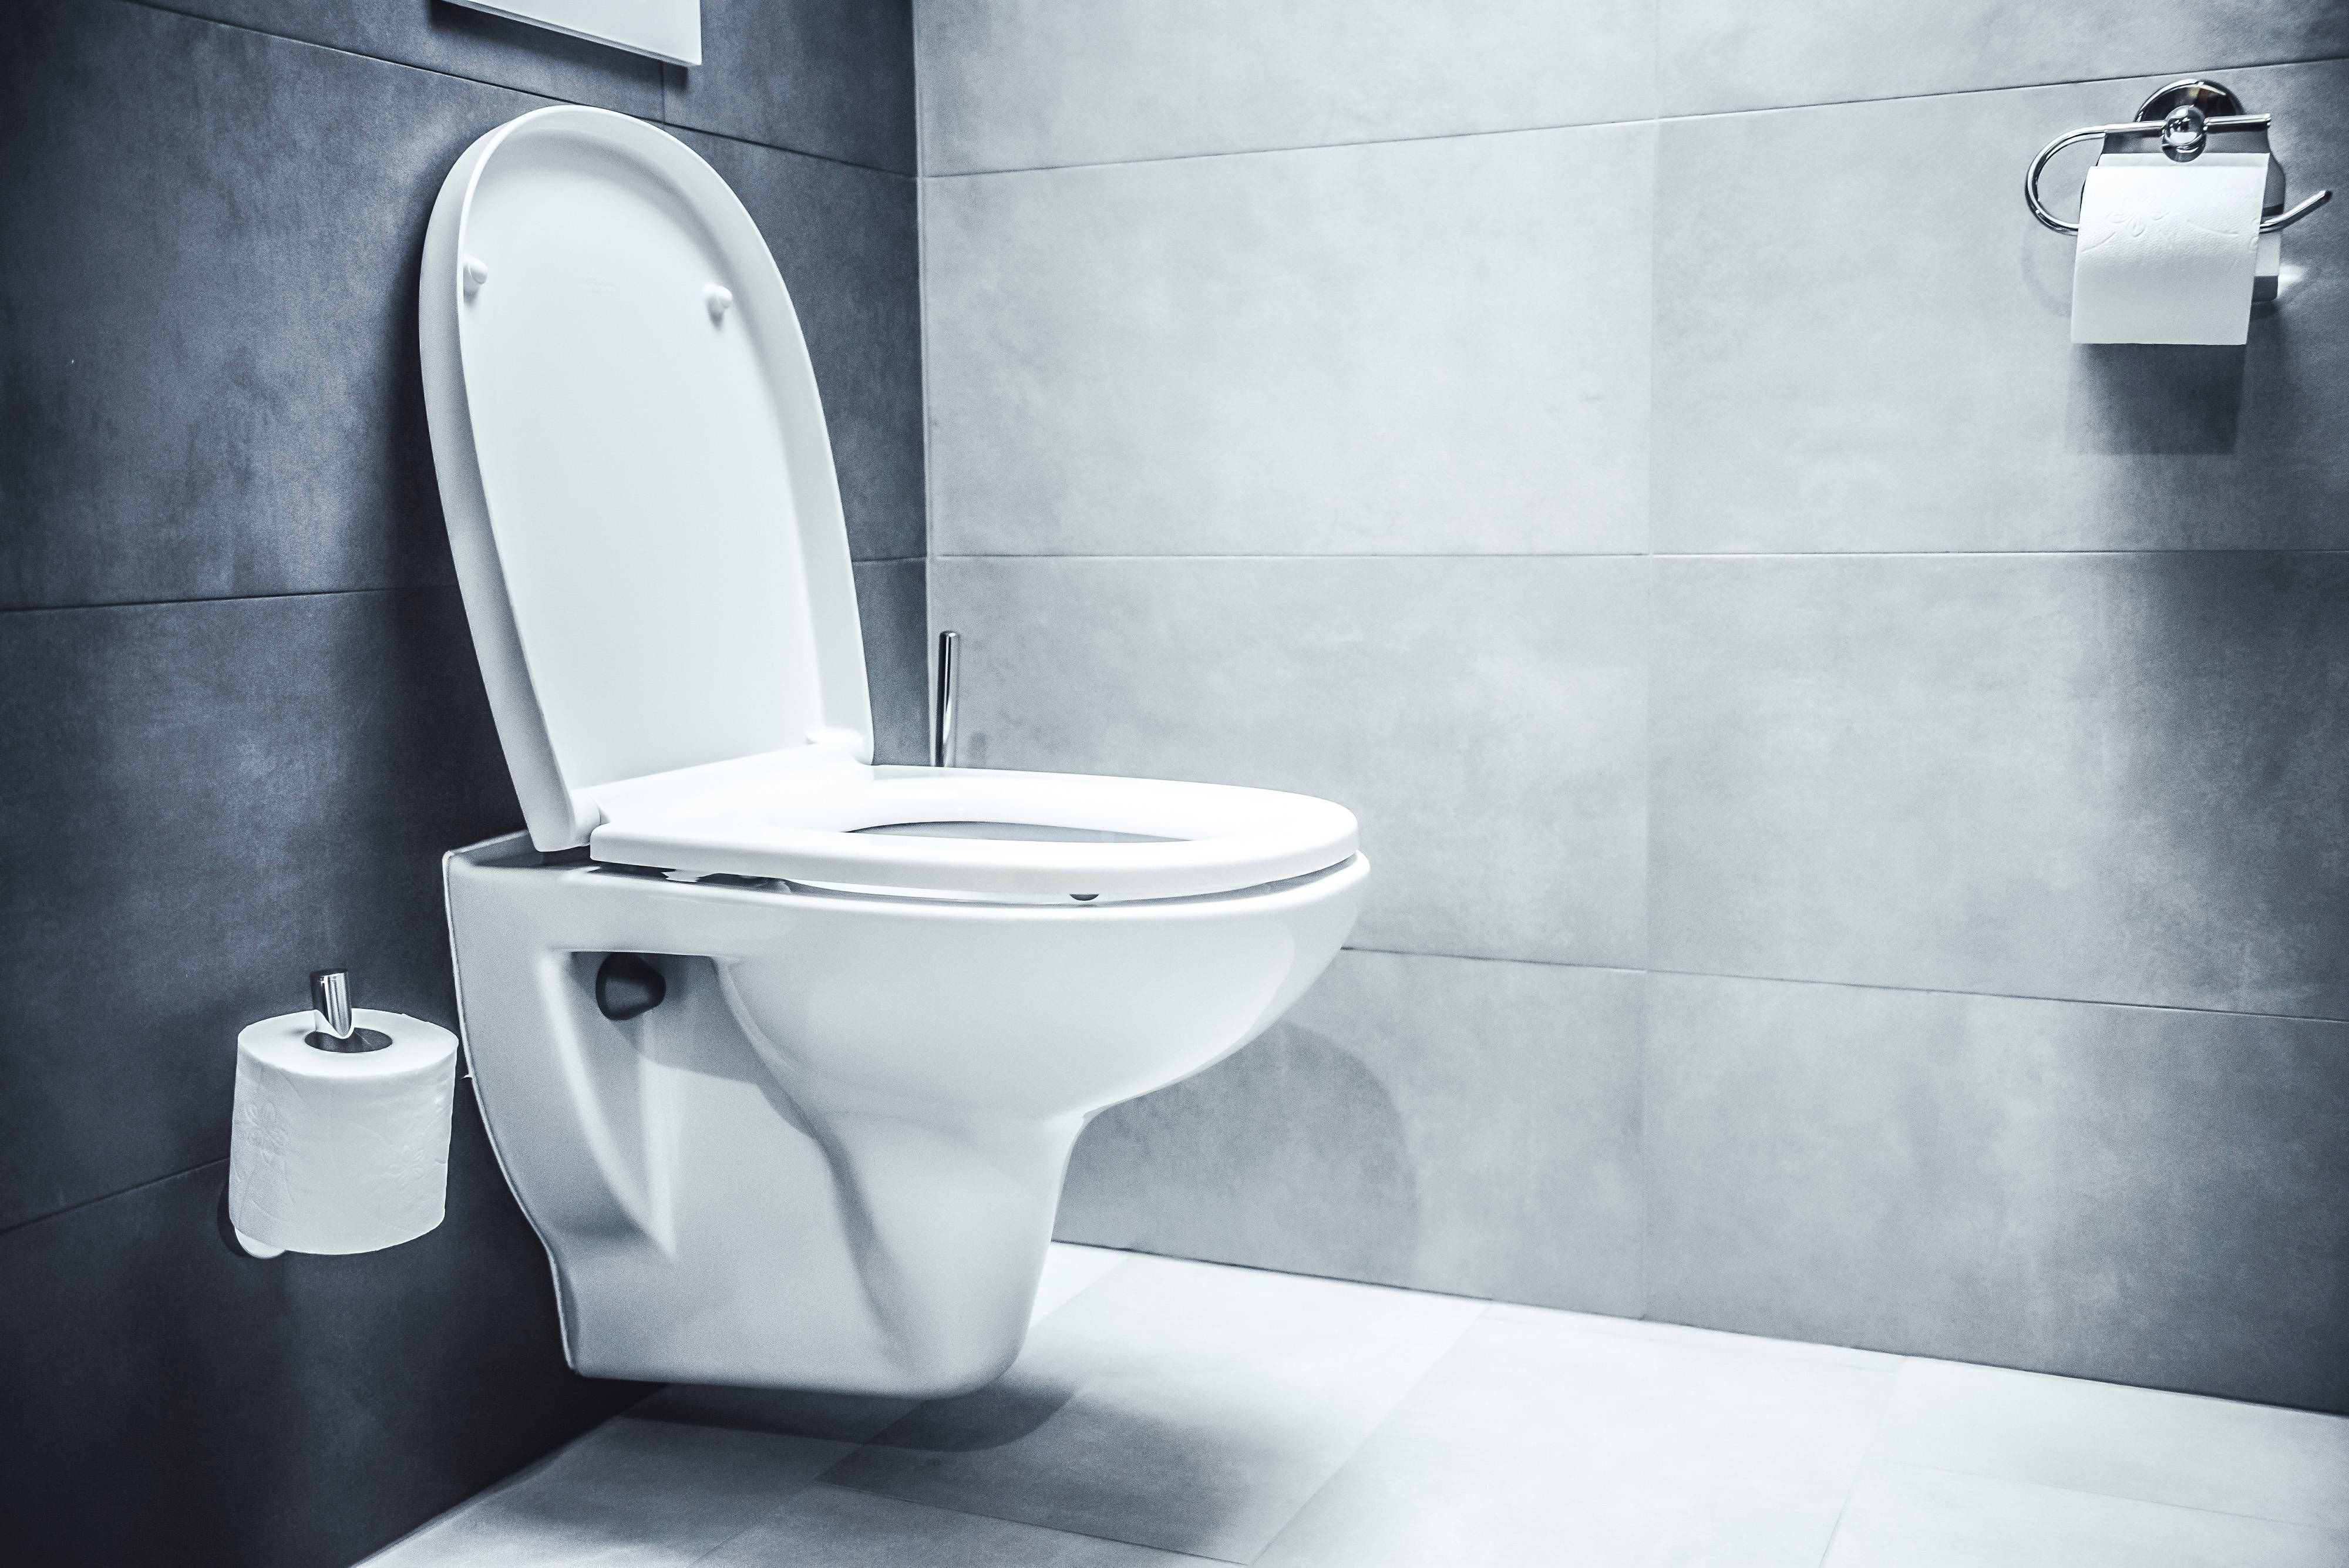 rebates-available-to-replace-old-water-guzzling-toilets-in-coral-springs